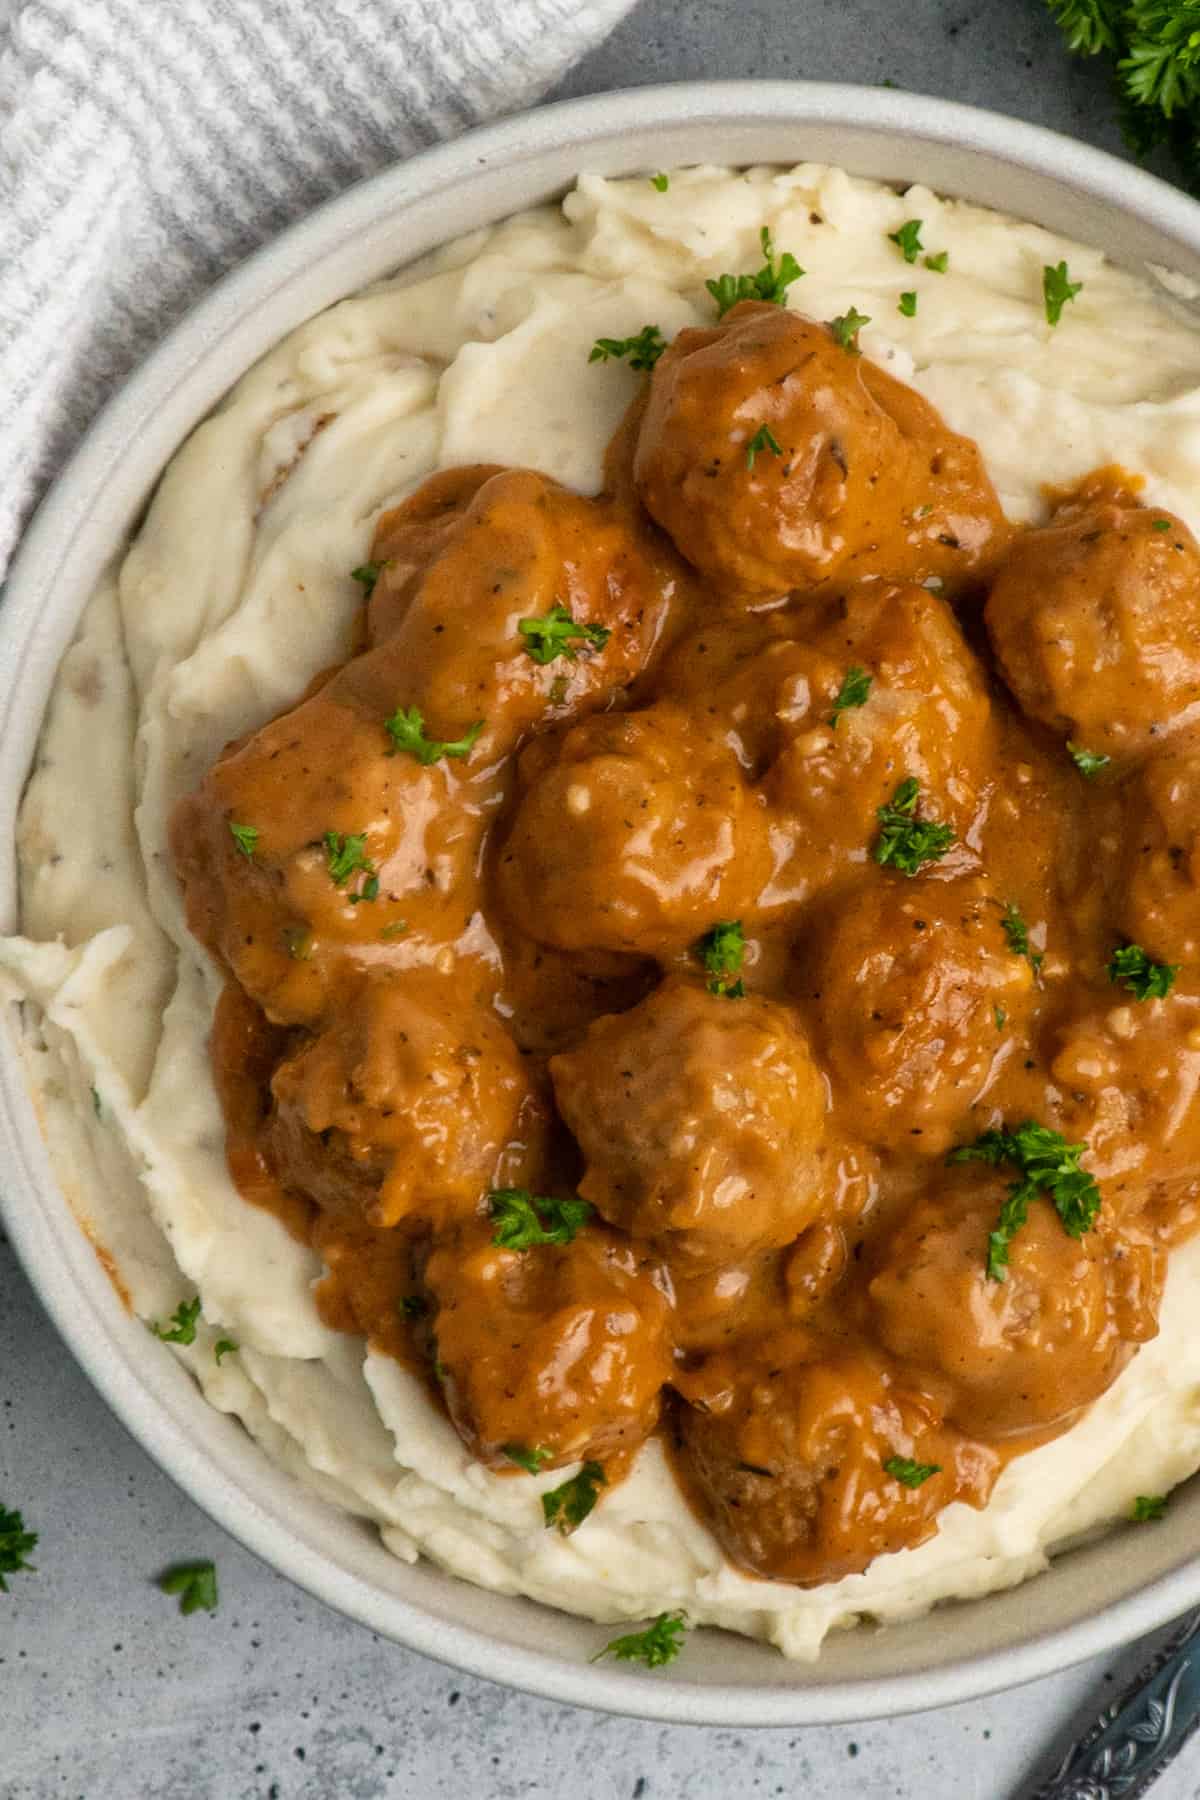 Crock Pot meatballs and gravy over a bowl of mashed potatoes.